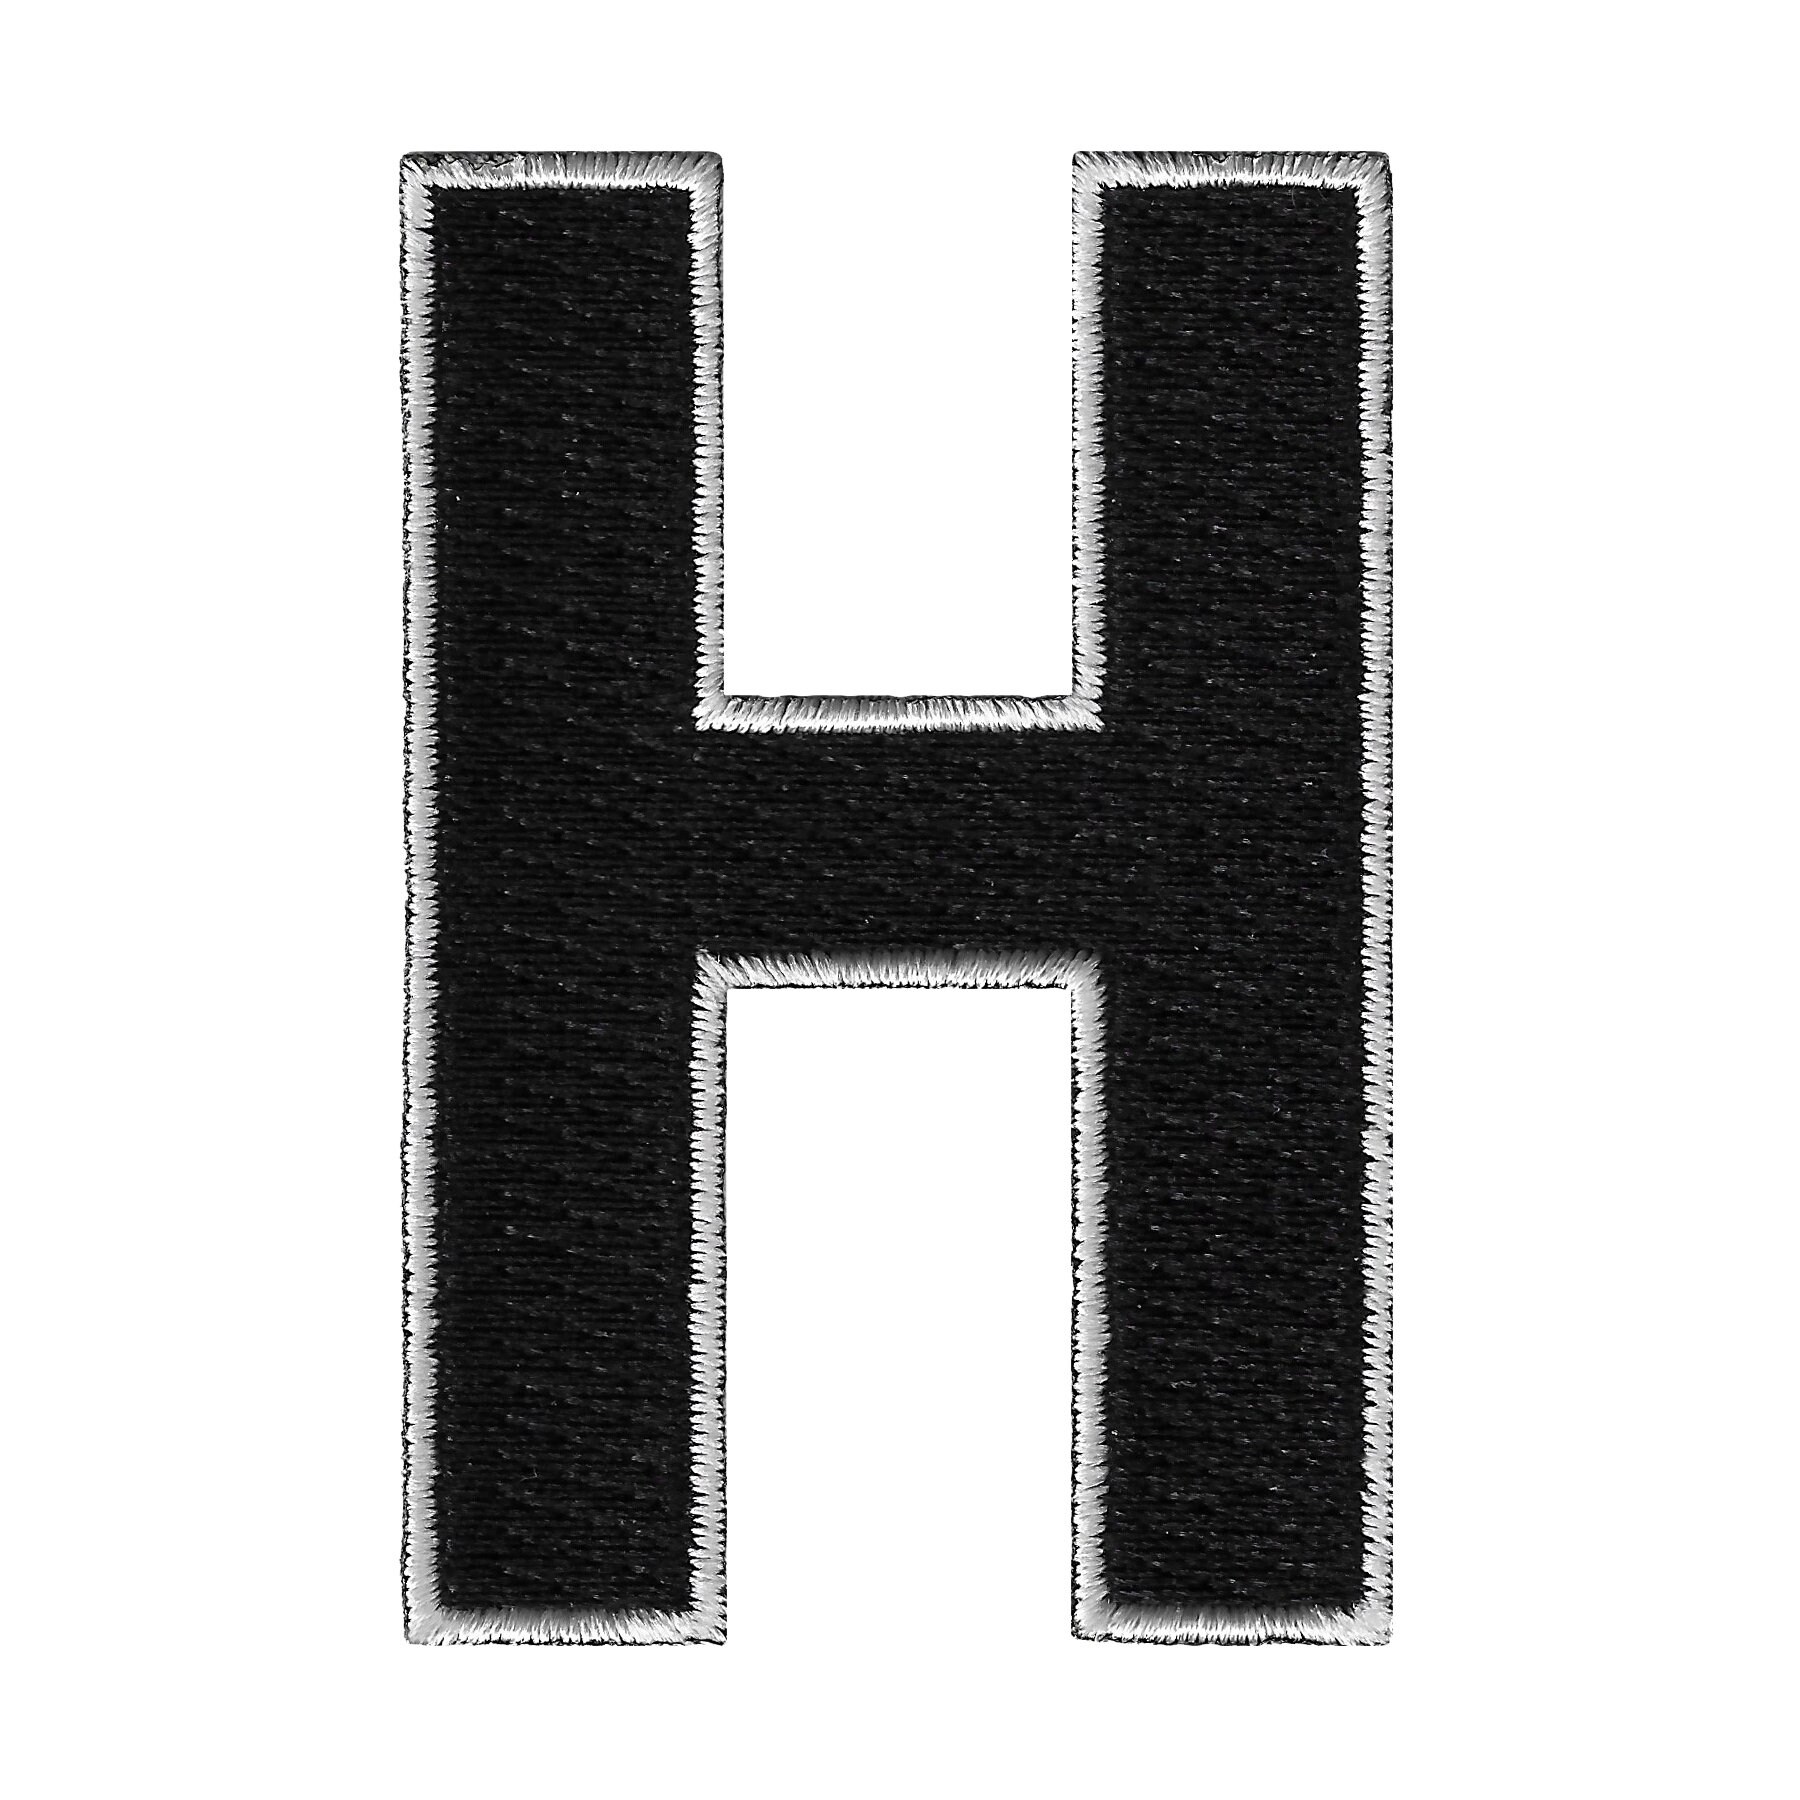 Black And White Lil Bougie Alphabet Embroidered Iron On Letter Patch For  Sewing On Clothes, Bags, Baby Girl Shoes Decorative Applique From  Moomoo2016, $0.35